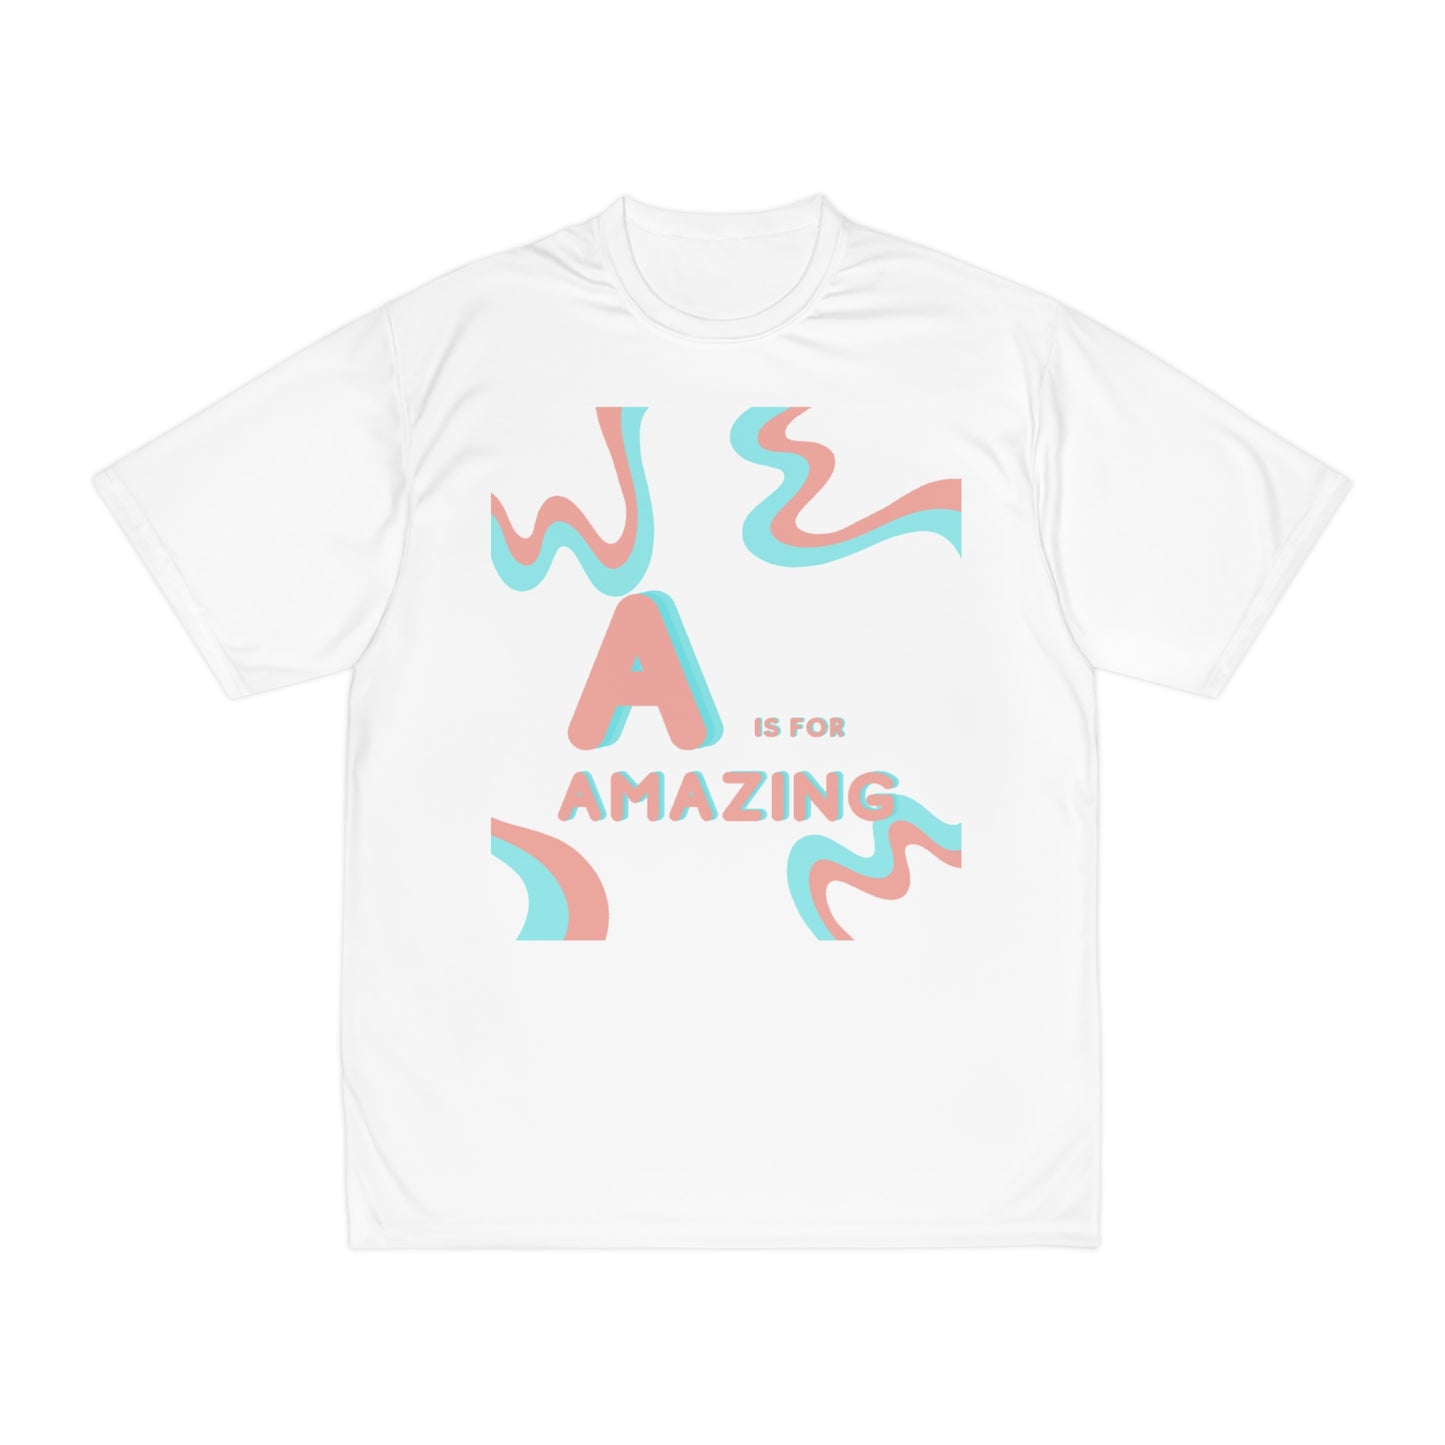 A is for Amazing Men's Performance T-Shirt, Men shirt, gift for men, dads shirt, gift for dads